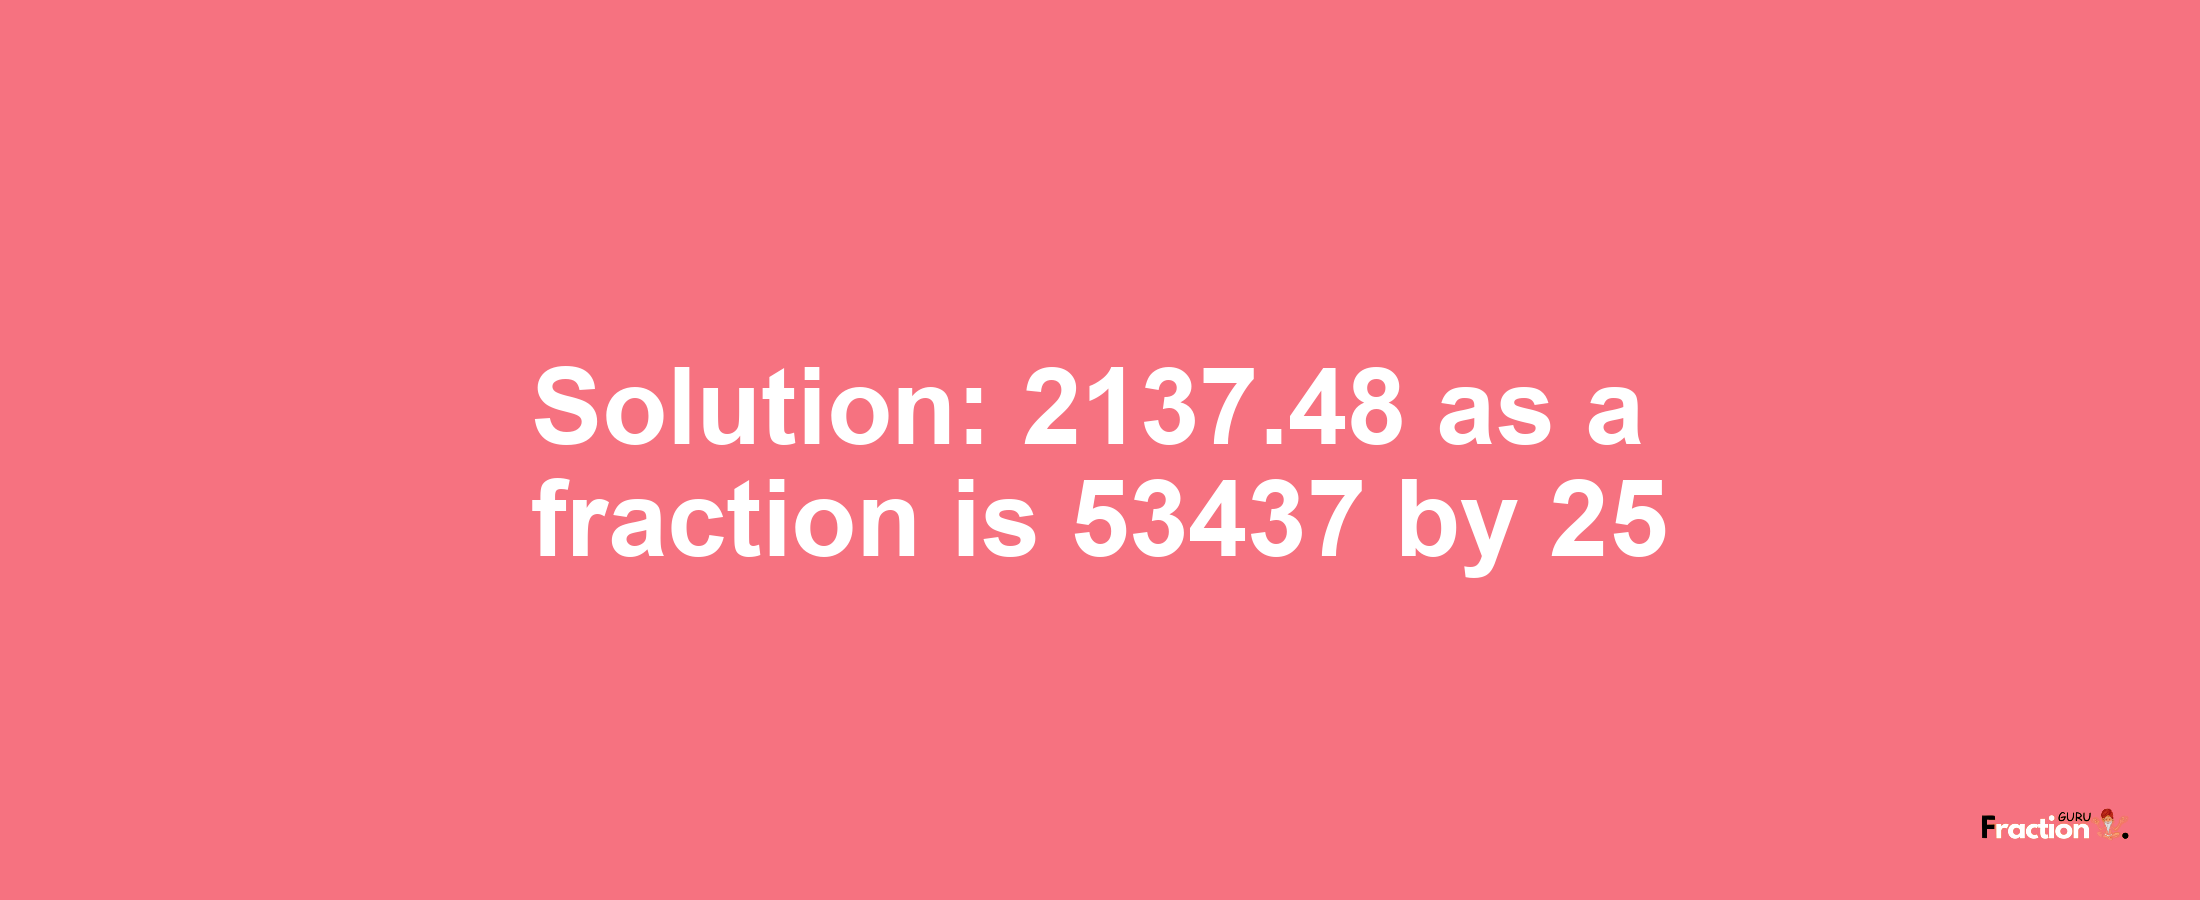 Solution:2137.48 as a fraction is 53437/25